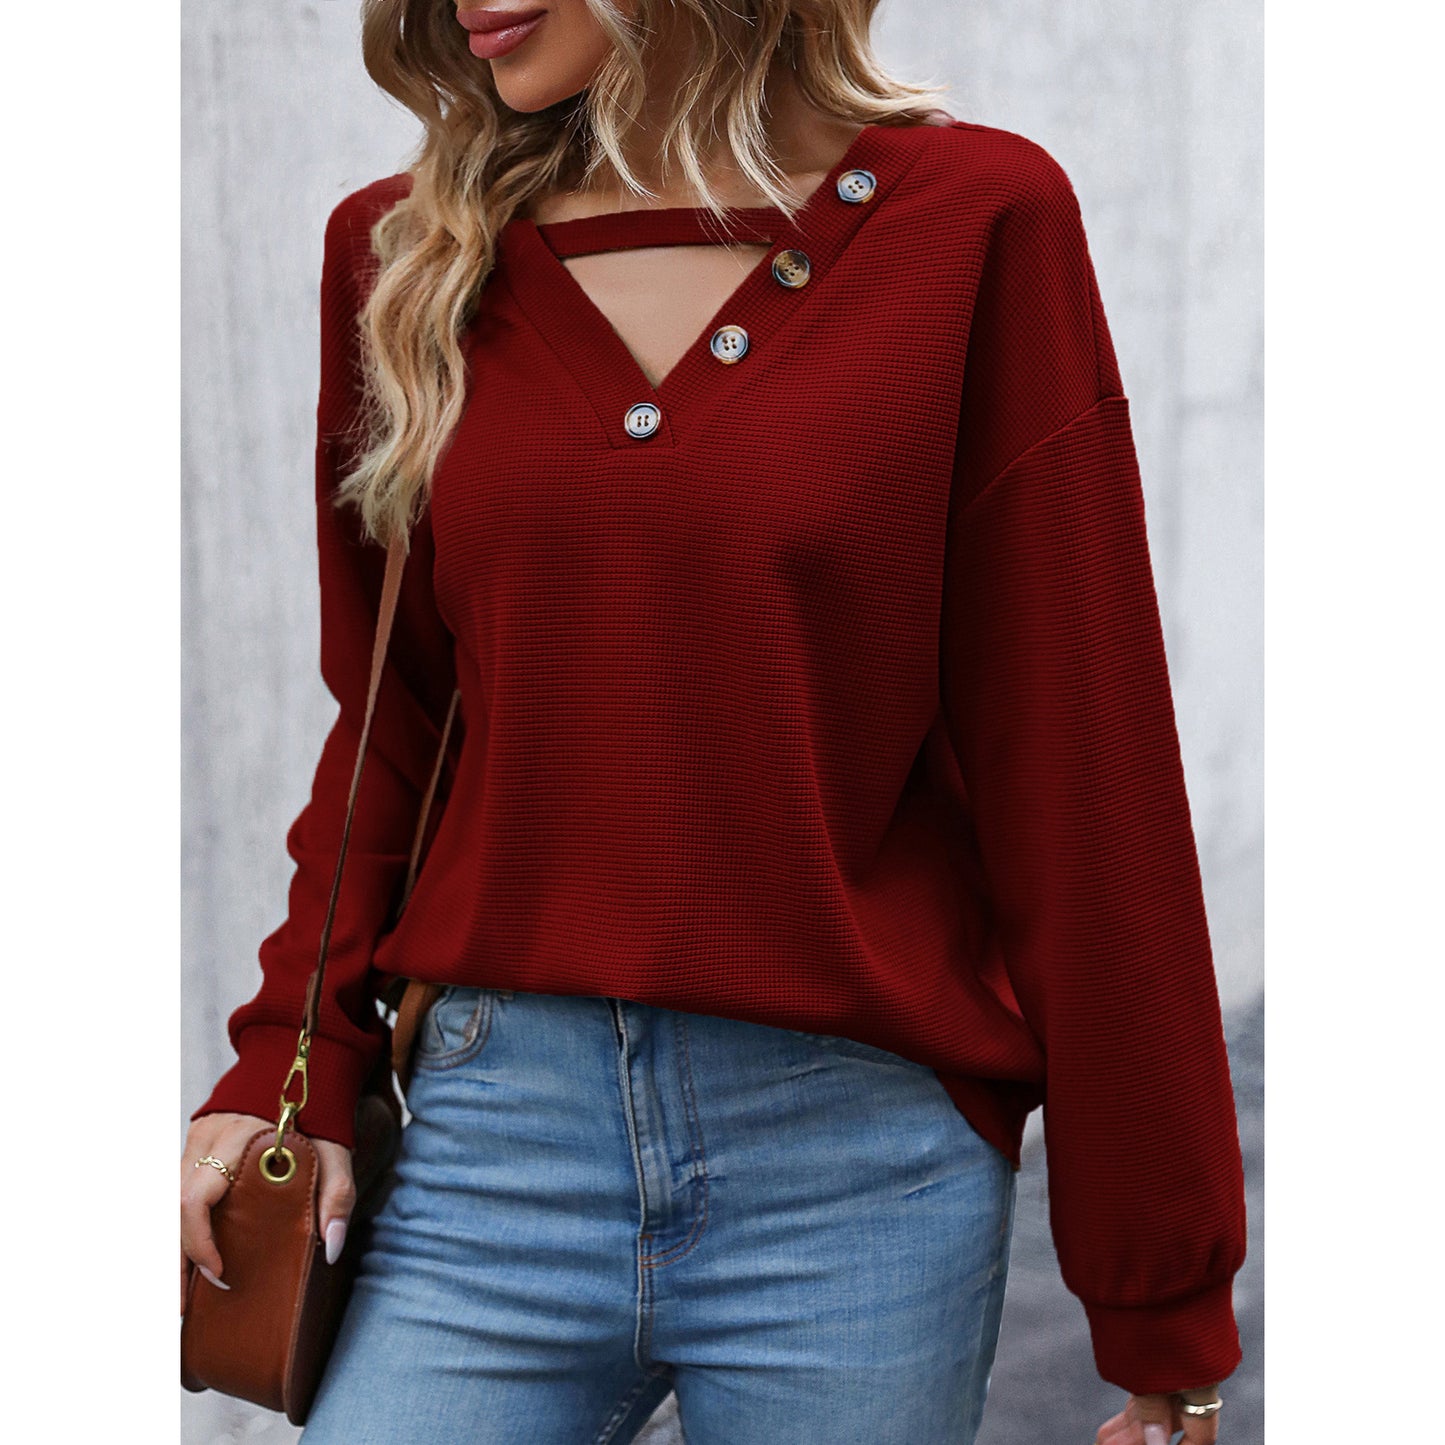 Long Sleeve V-neck Knitted Top with Hollow Out Design